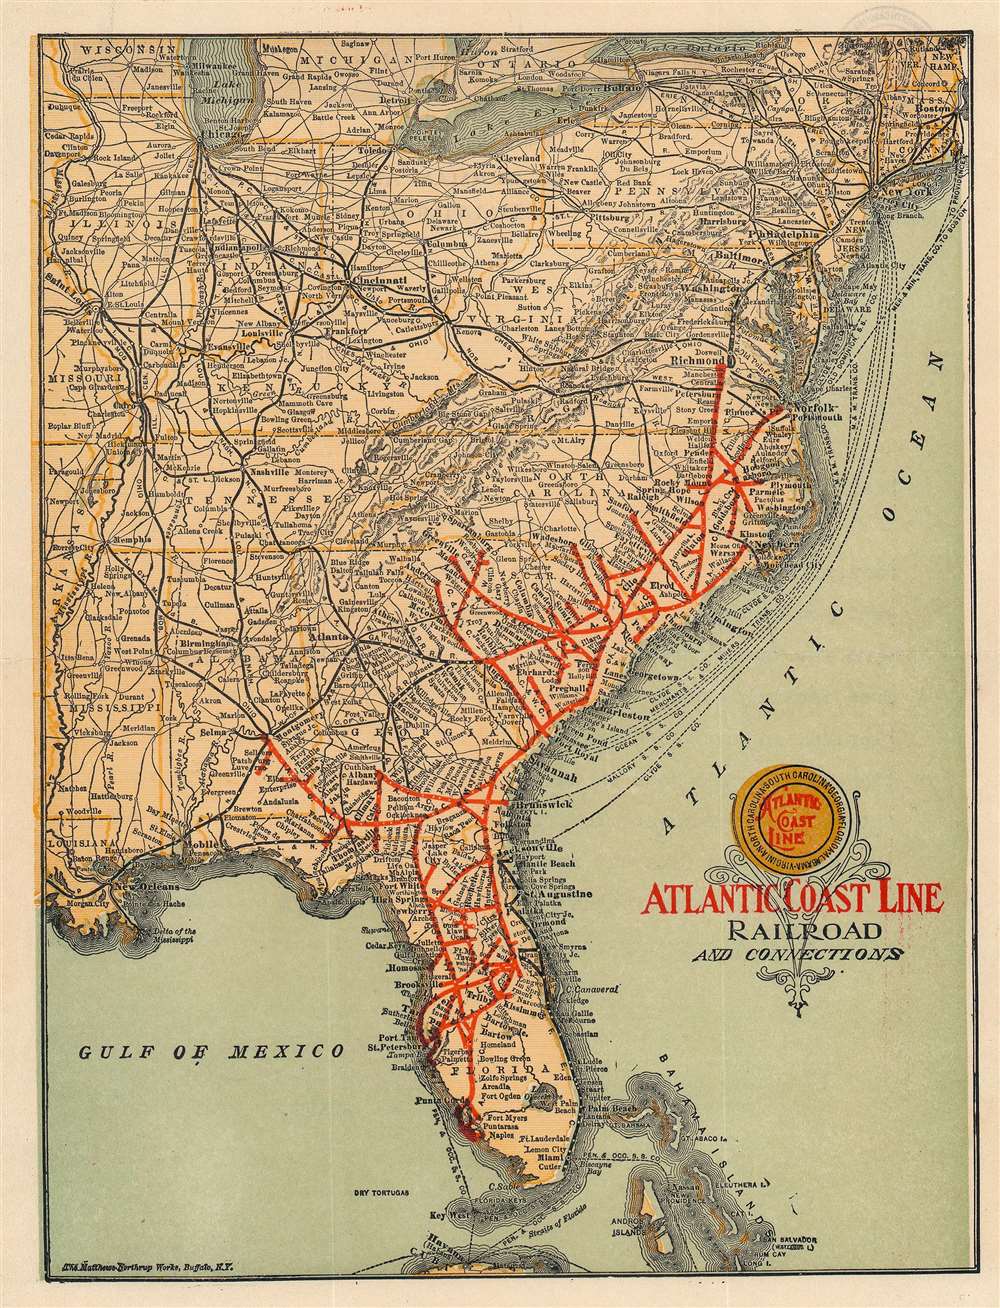 Atlantic Coast Line Railroad and Connections. - Main View